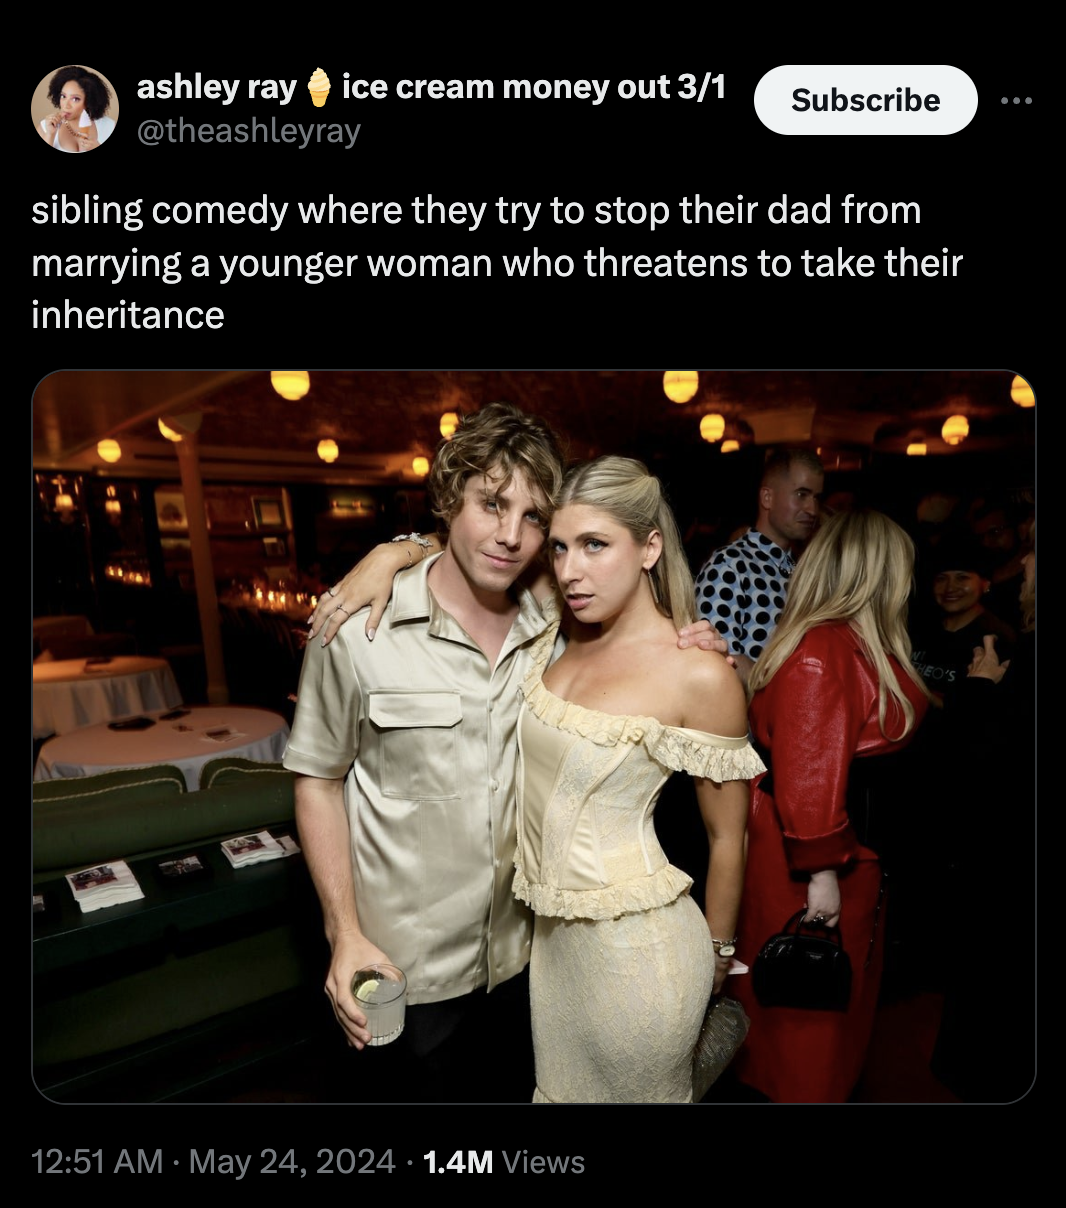 photo caption - ashley ray ice cream money out 31 Subscribe sibling comedy where they try to stop their dad from marrying a younger woman who threatens to take their inheritance 1.4M Views